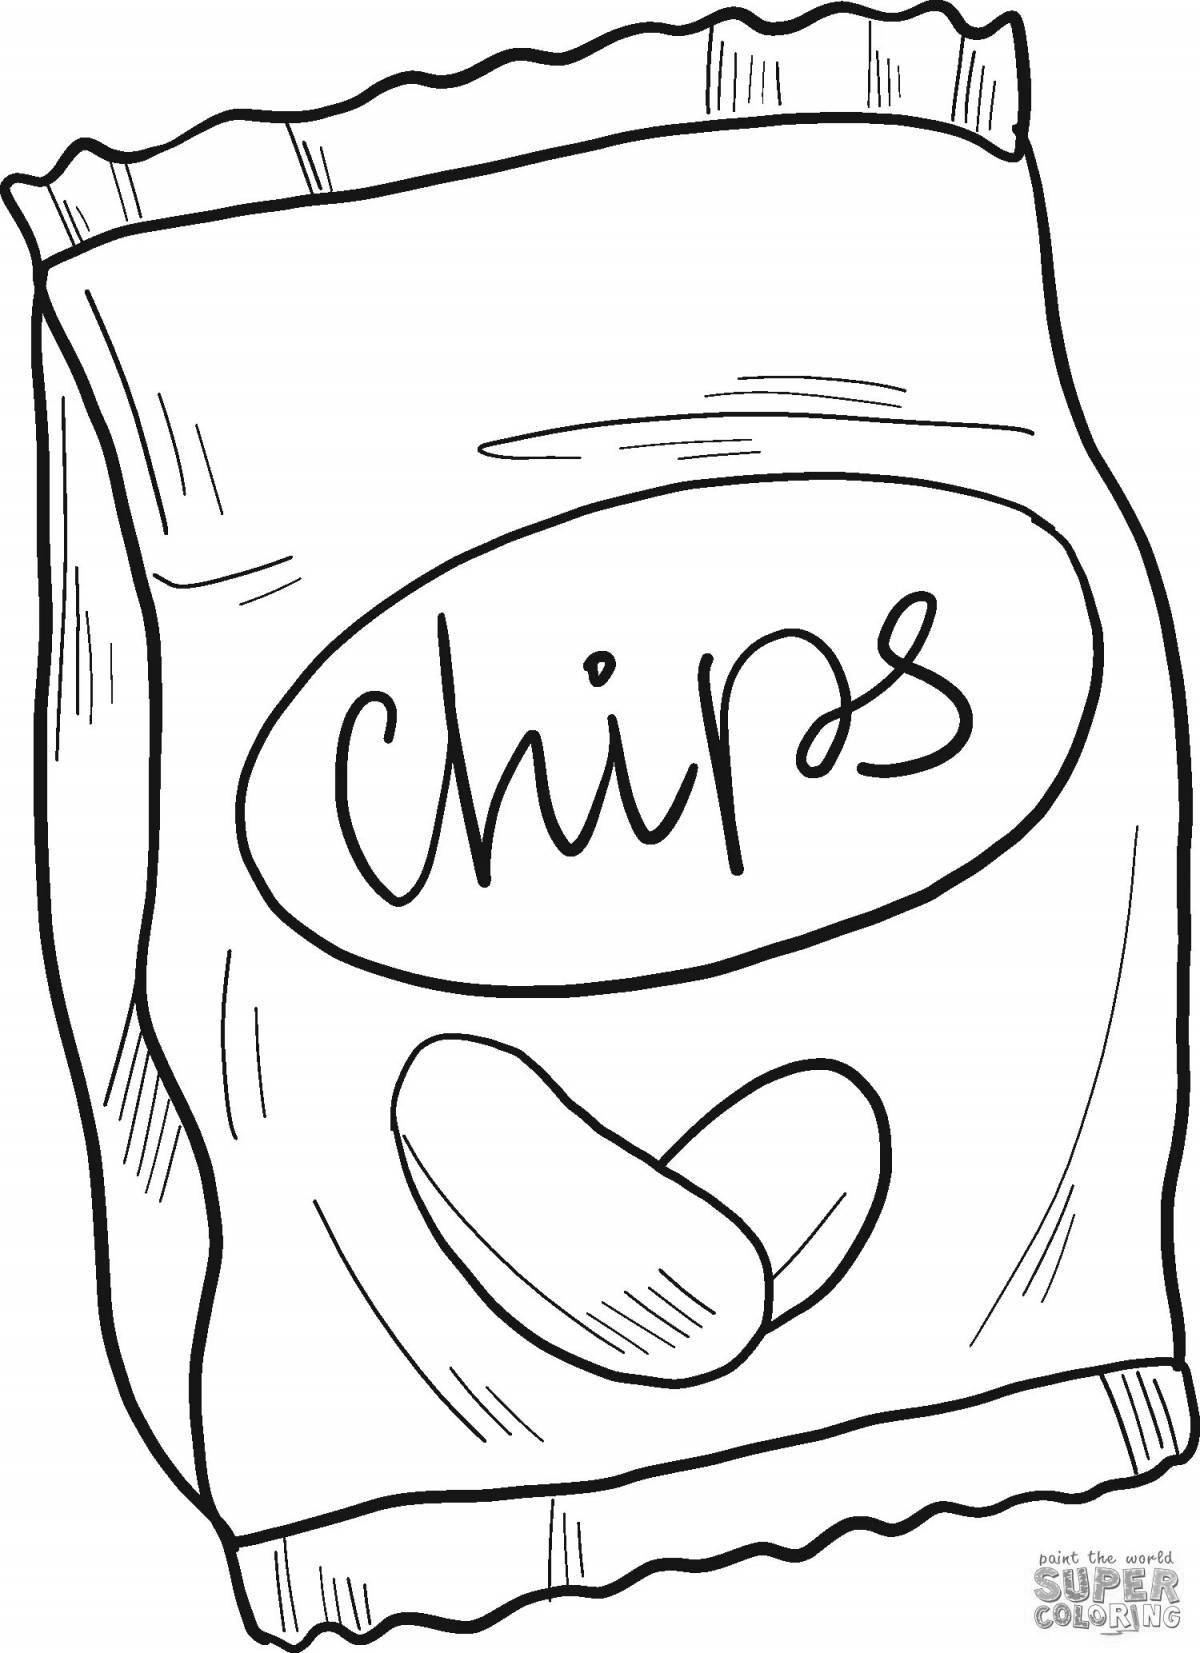 Coloring a satisfactory pack of chips